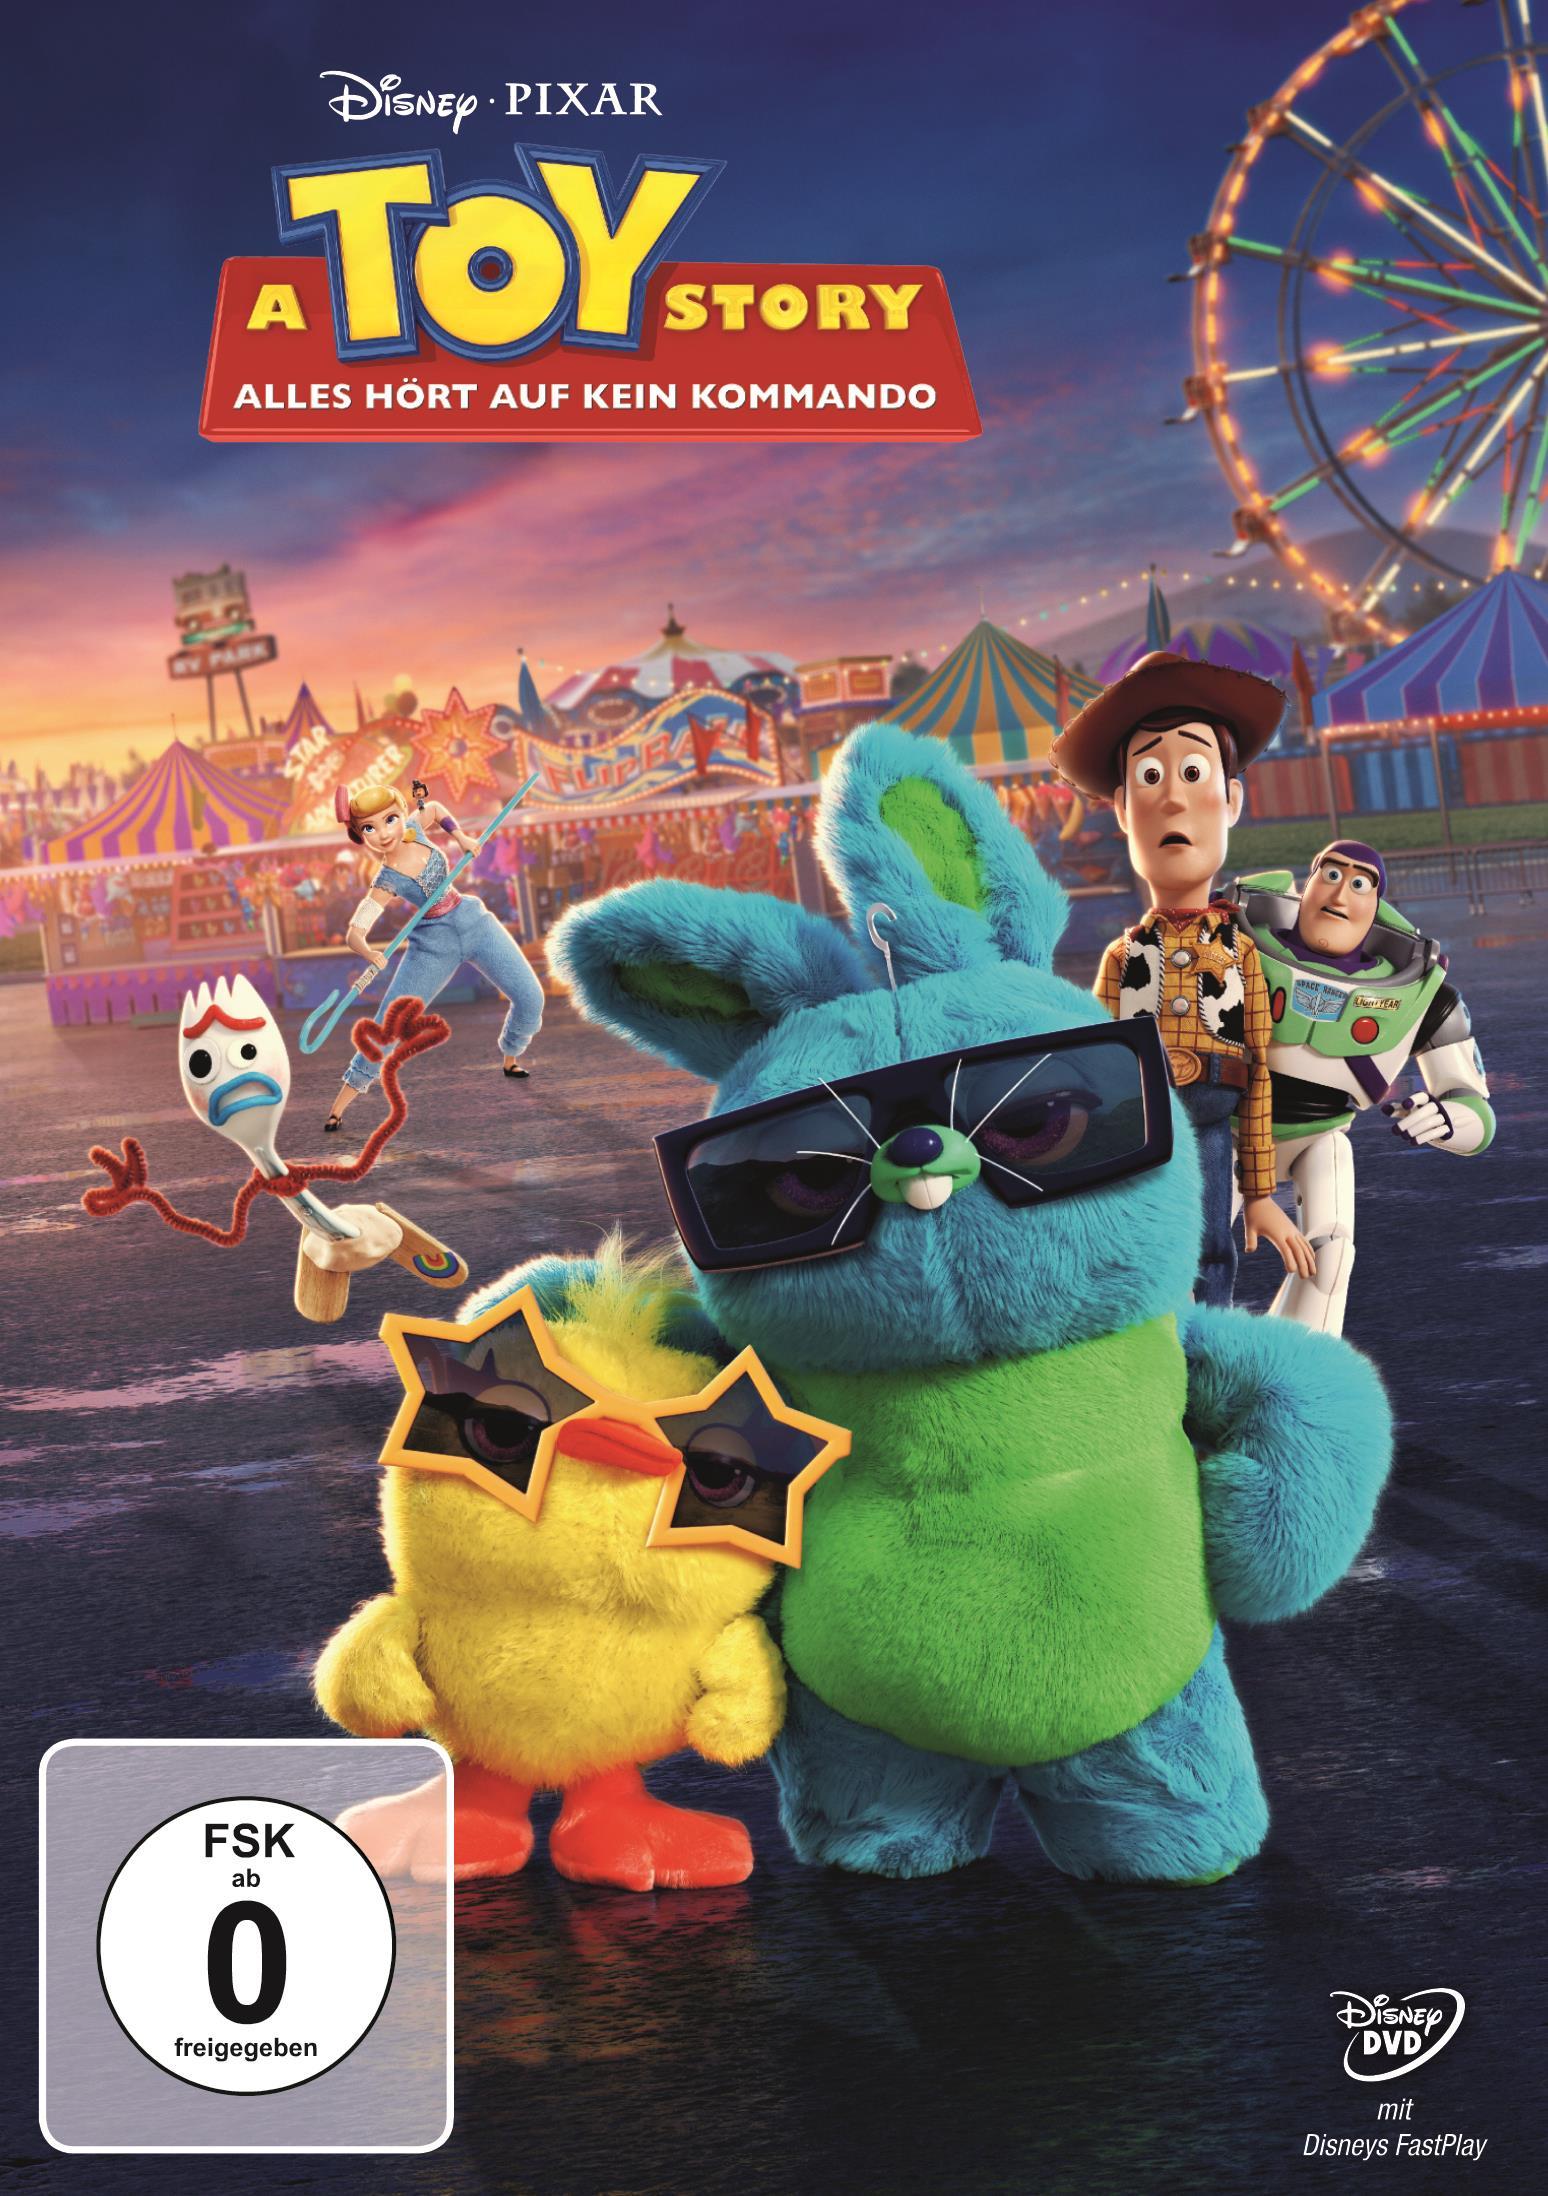 Image of A Toy Story: Alles hört auf kein Kommando